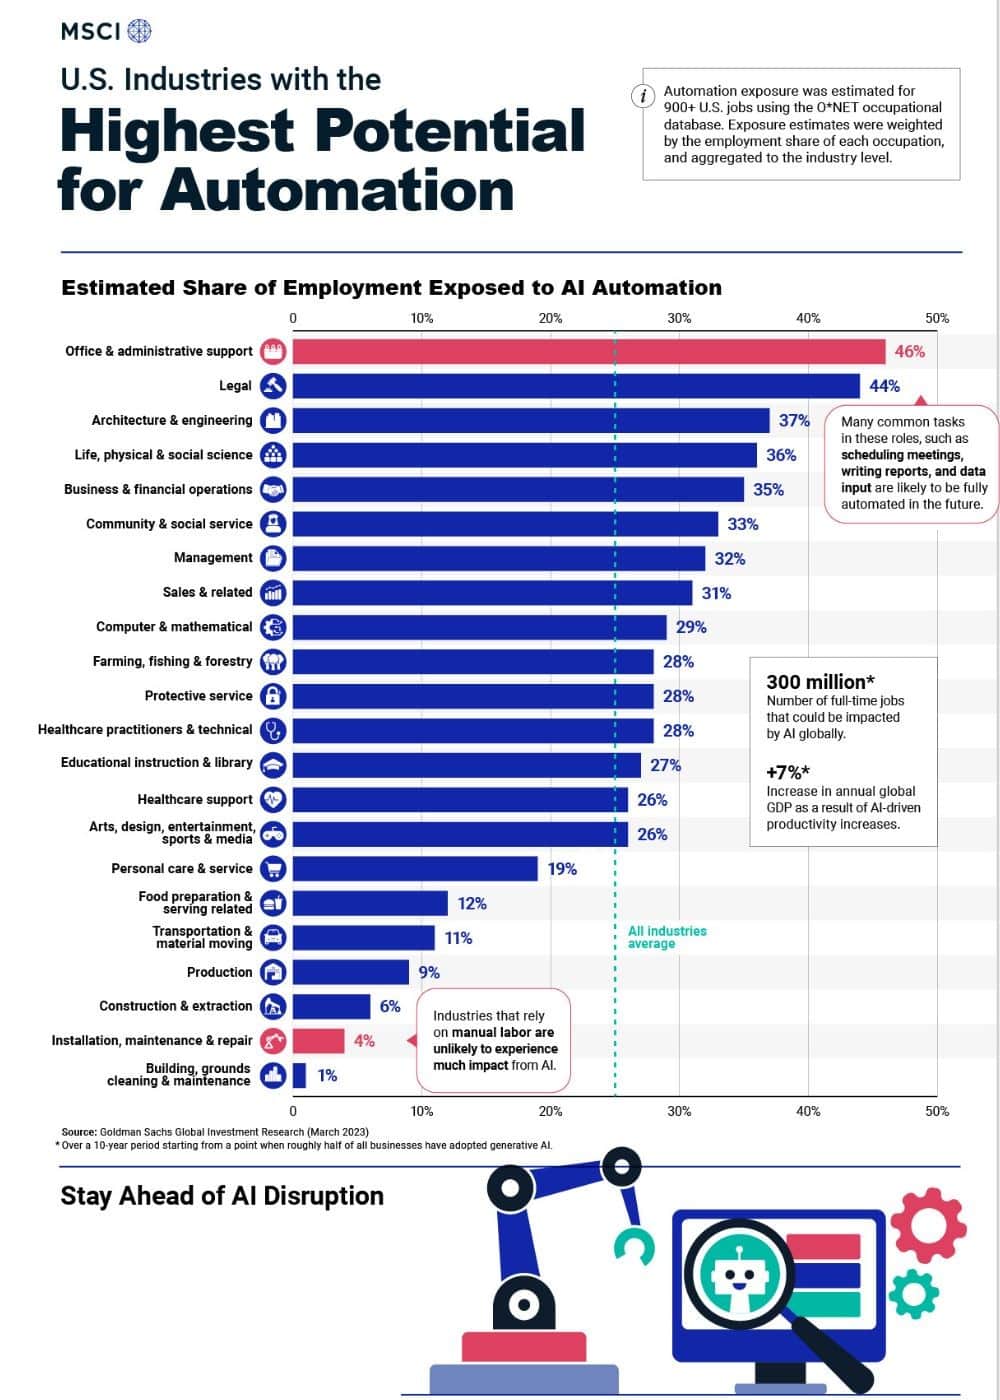 Highest Potential for Automation